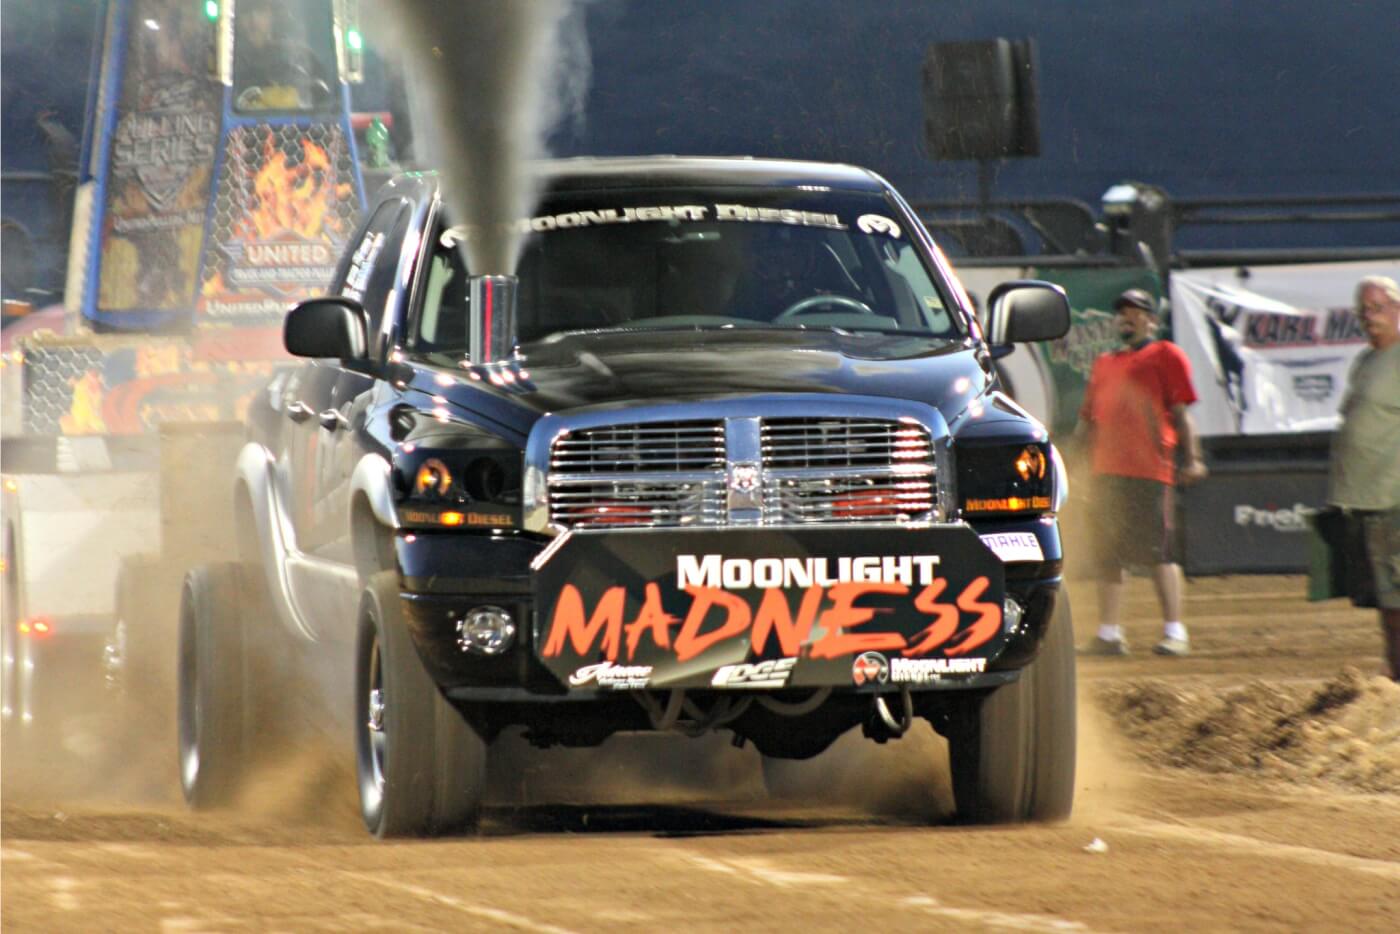 Ryan Thain’s “Moonlight Madness” truck put on a sled pull clinic in the 3.2 Class with a 310-ft. pull, more than 25 feet further than the next closest competitor.